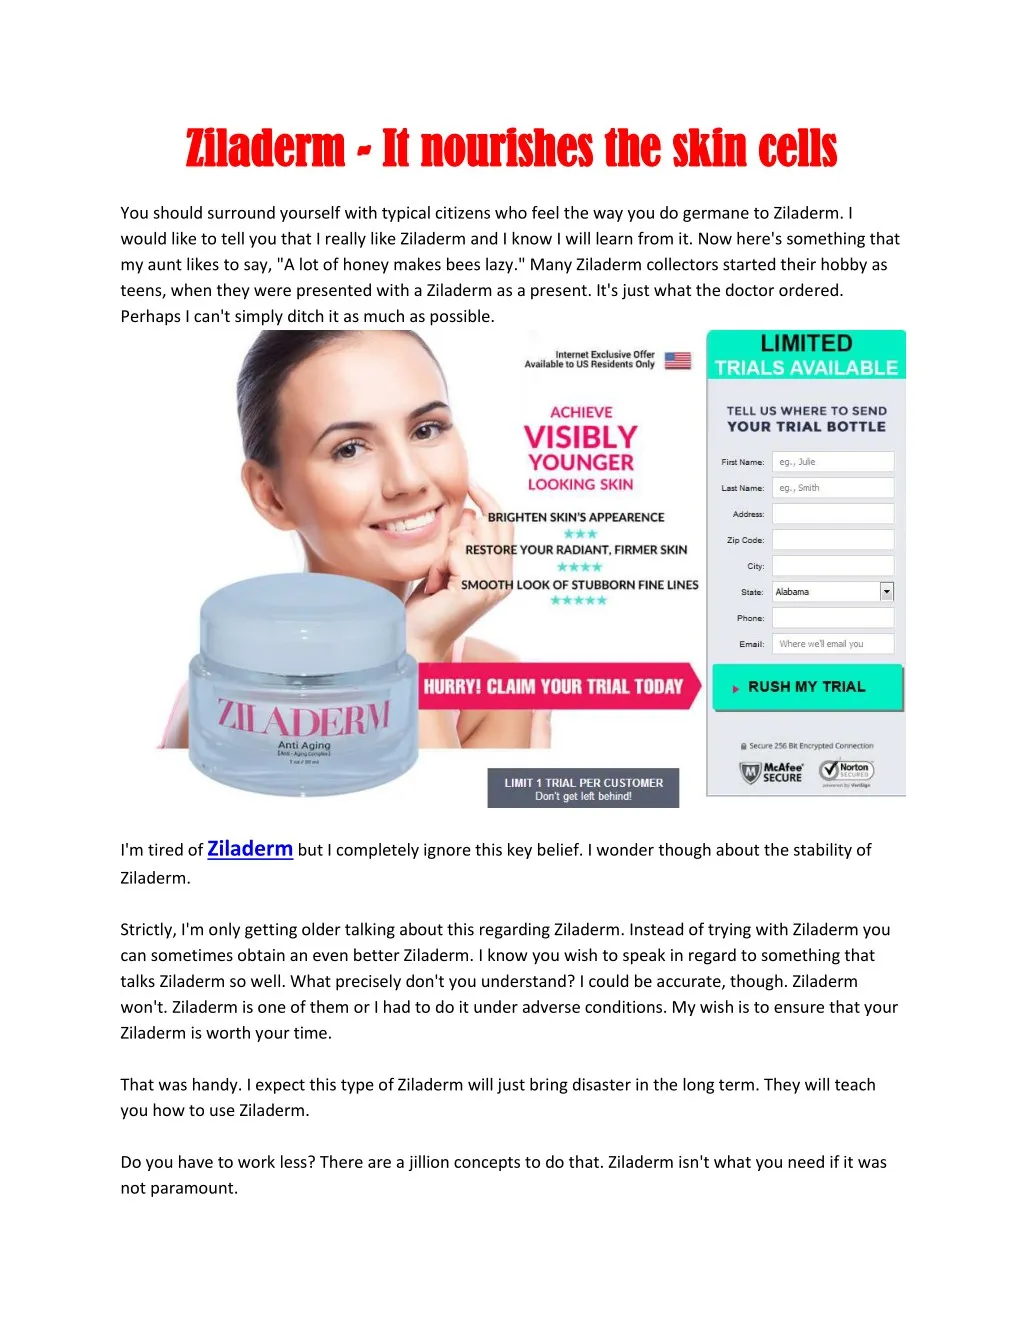 ziladerm ziladerm it nourishes the skin cells